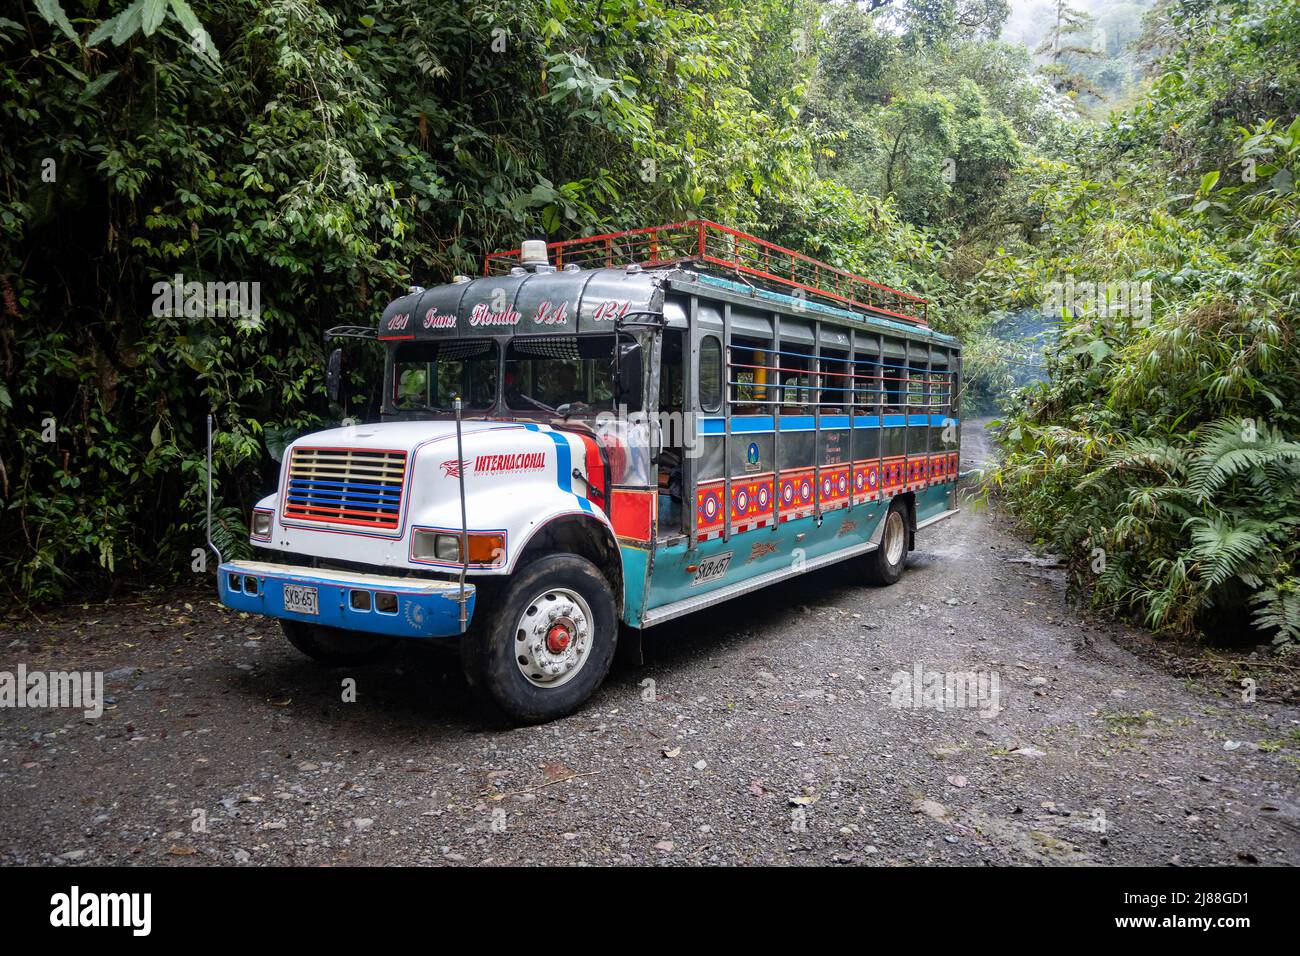 Chiva, colorfully painted bus, transportation mainly used in rural area. Colombia, South America. Stock Photo